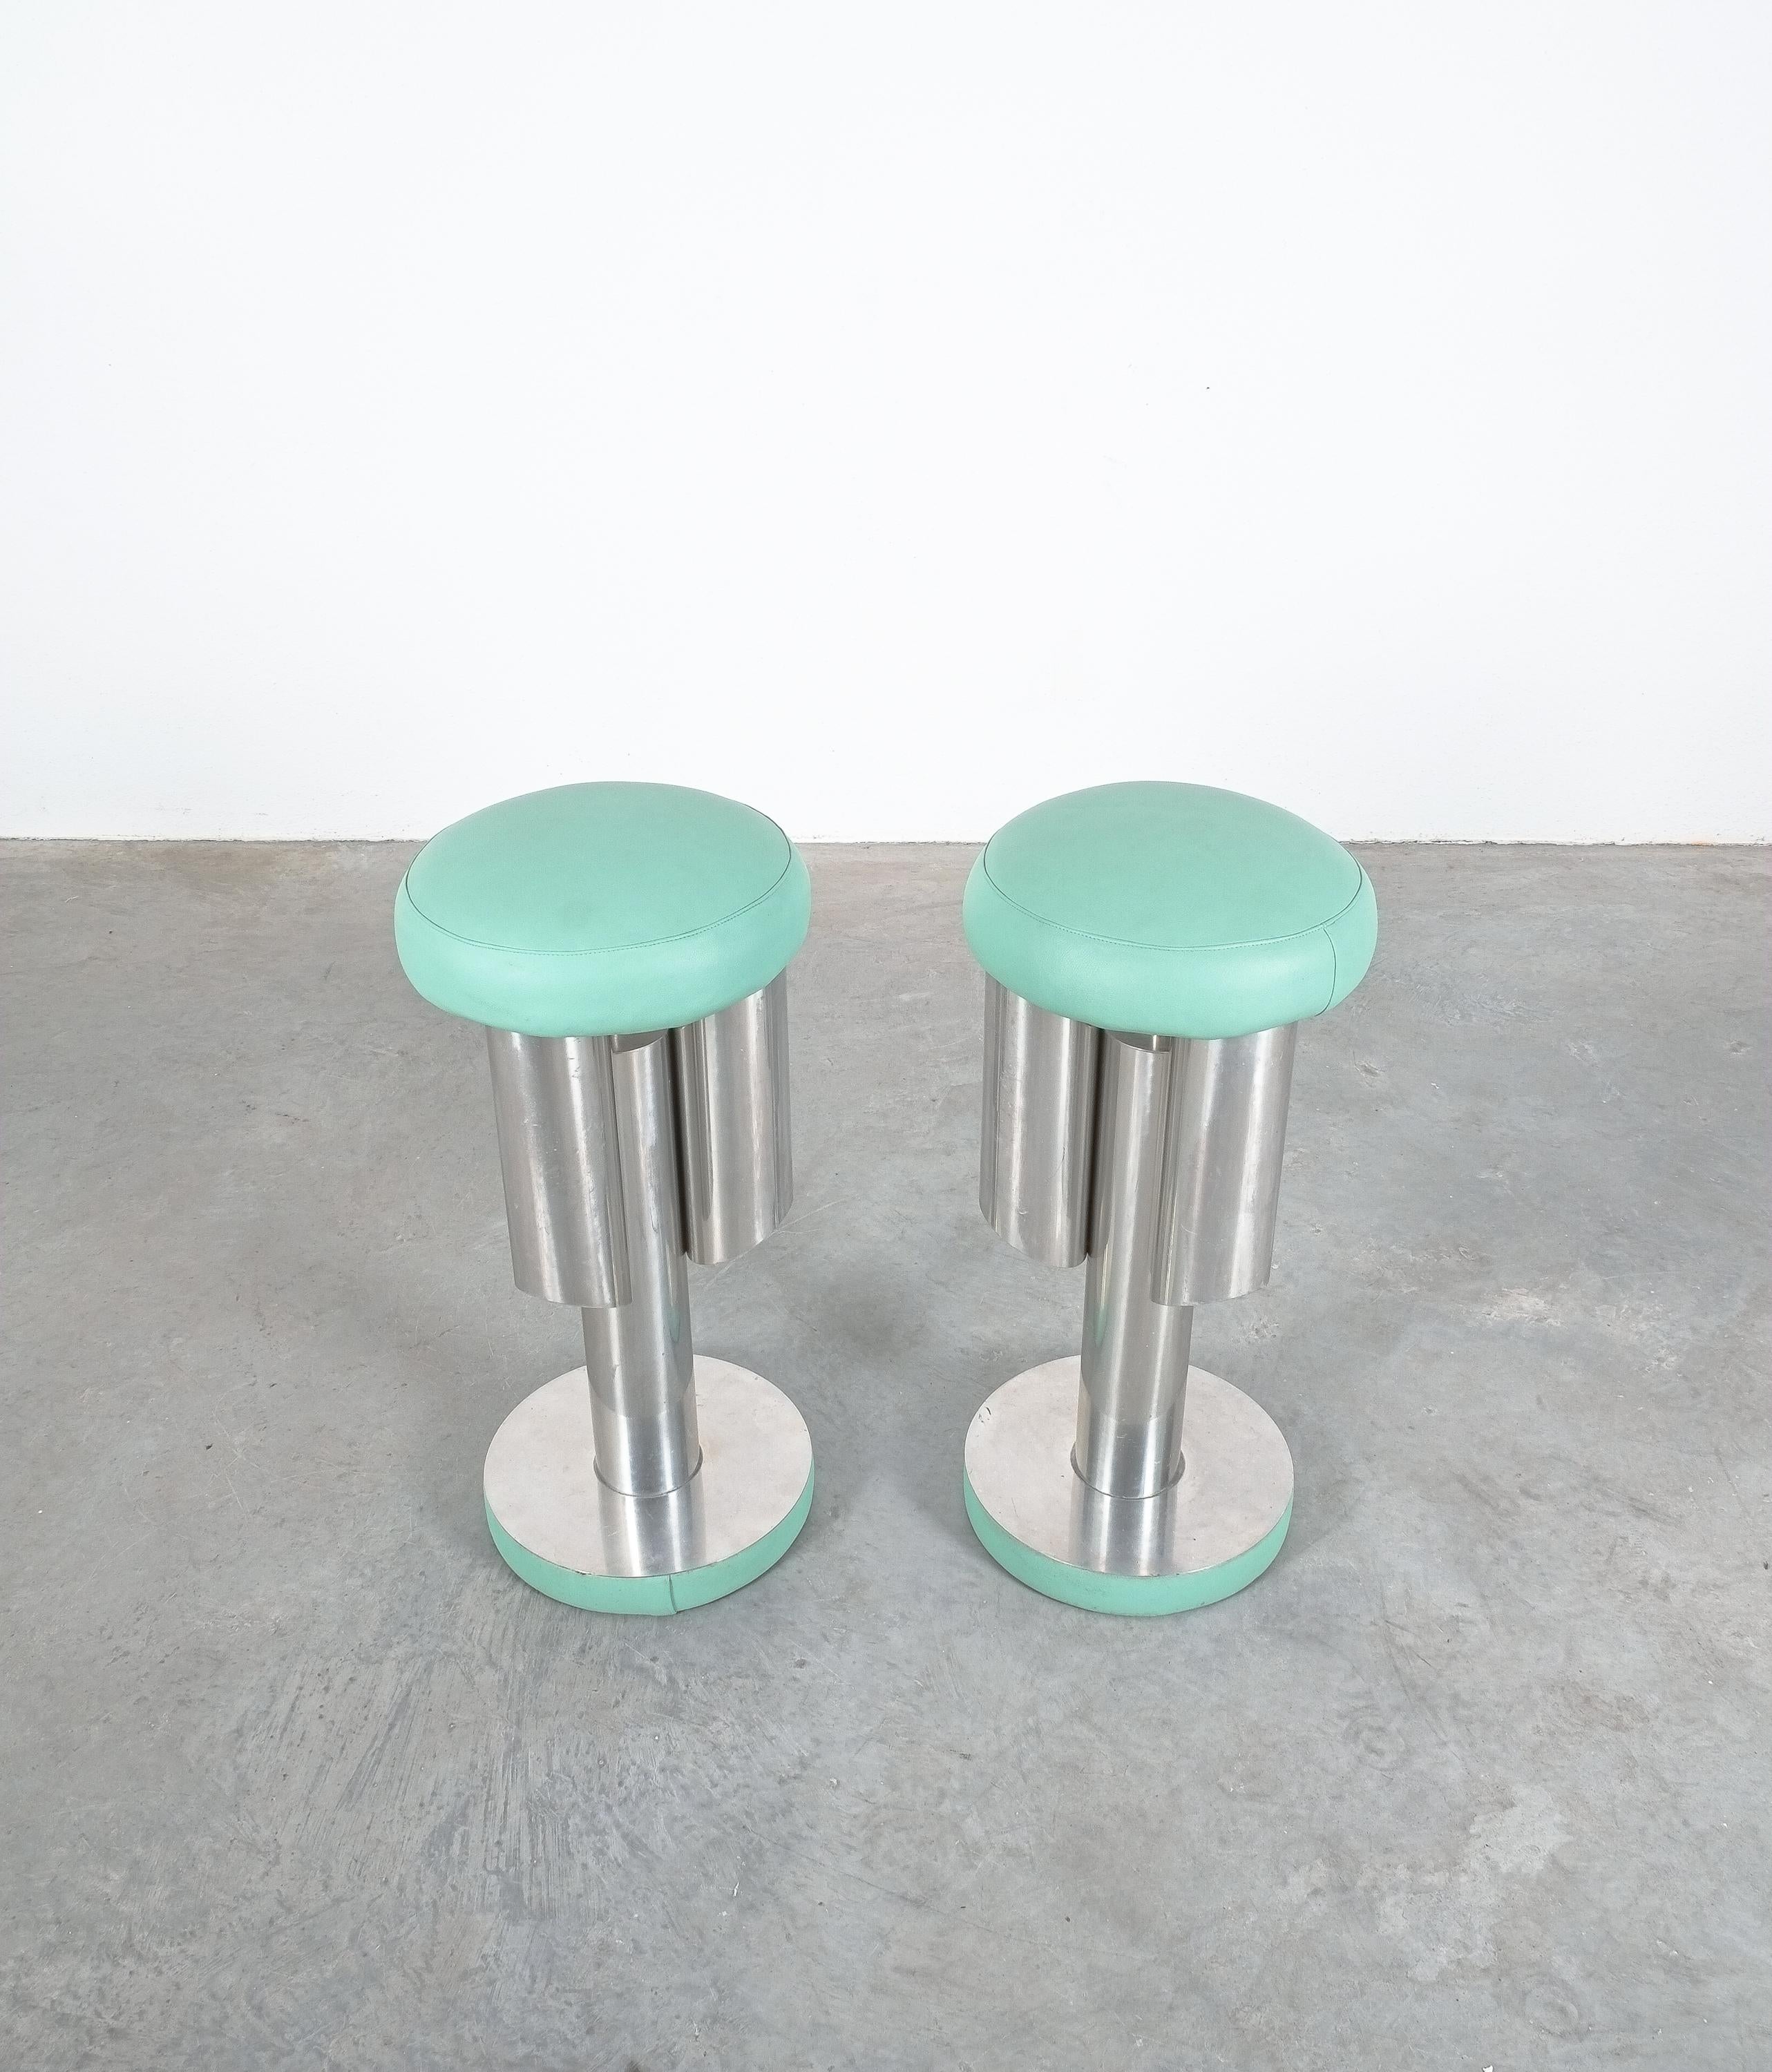 Pair of Midcentury Rocket Stools from Aluminum and Leather, Italy 1